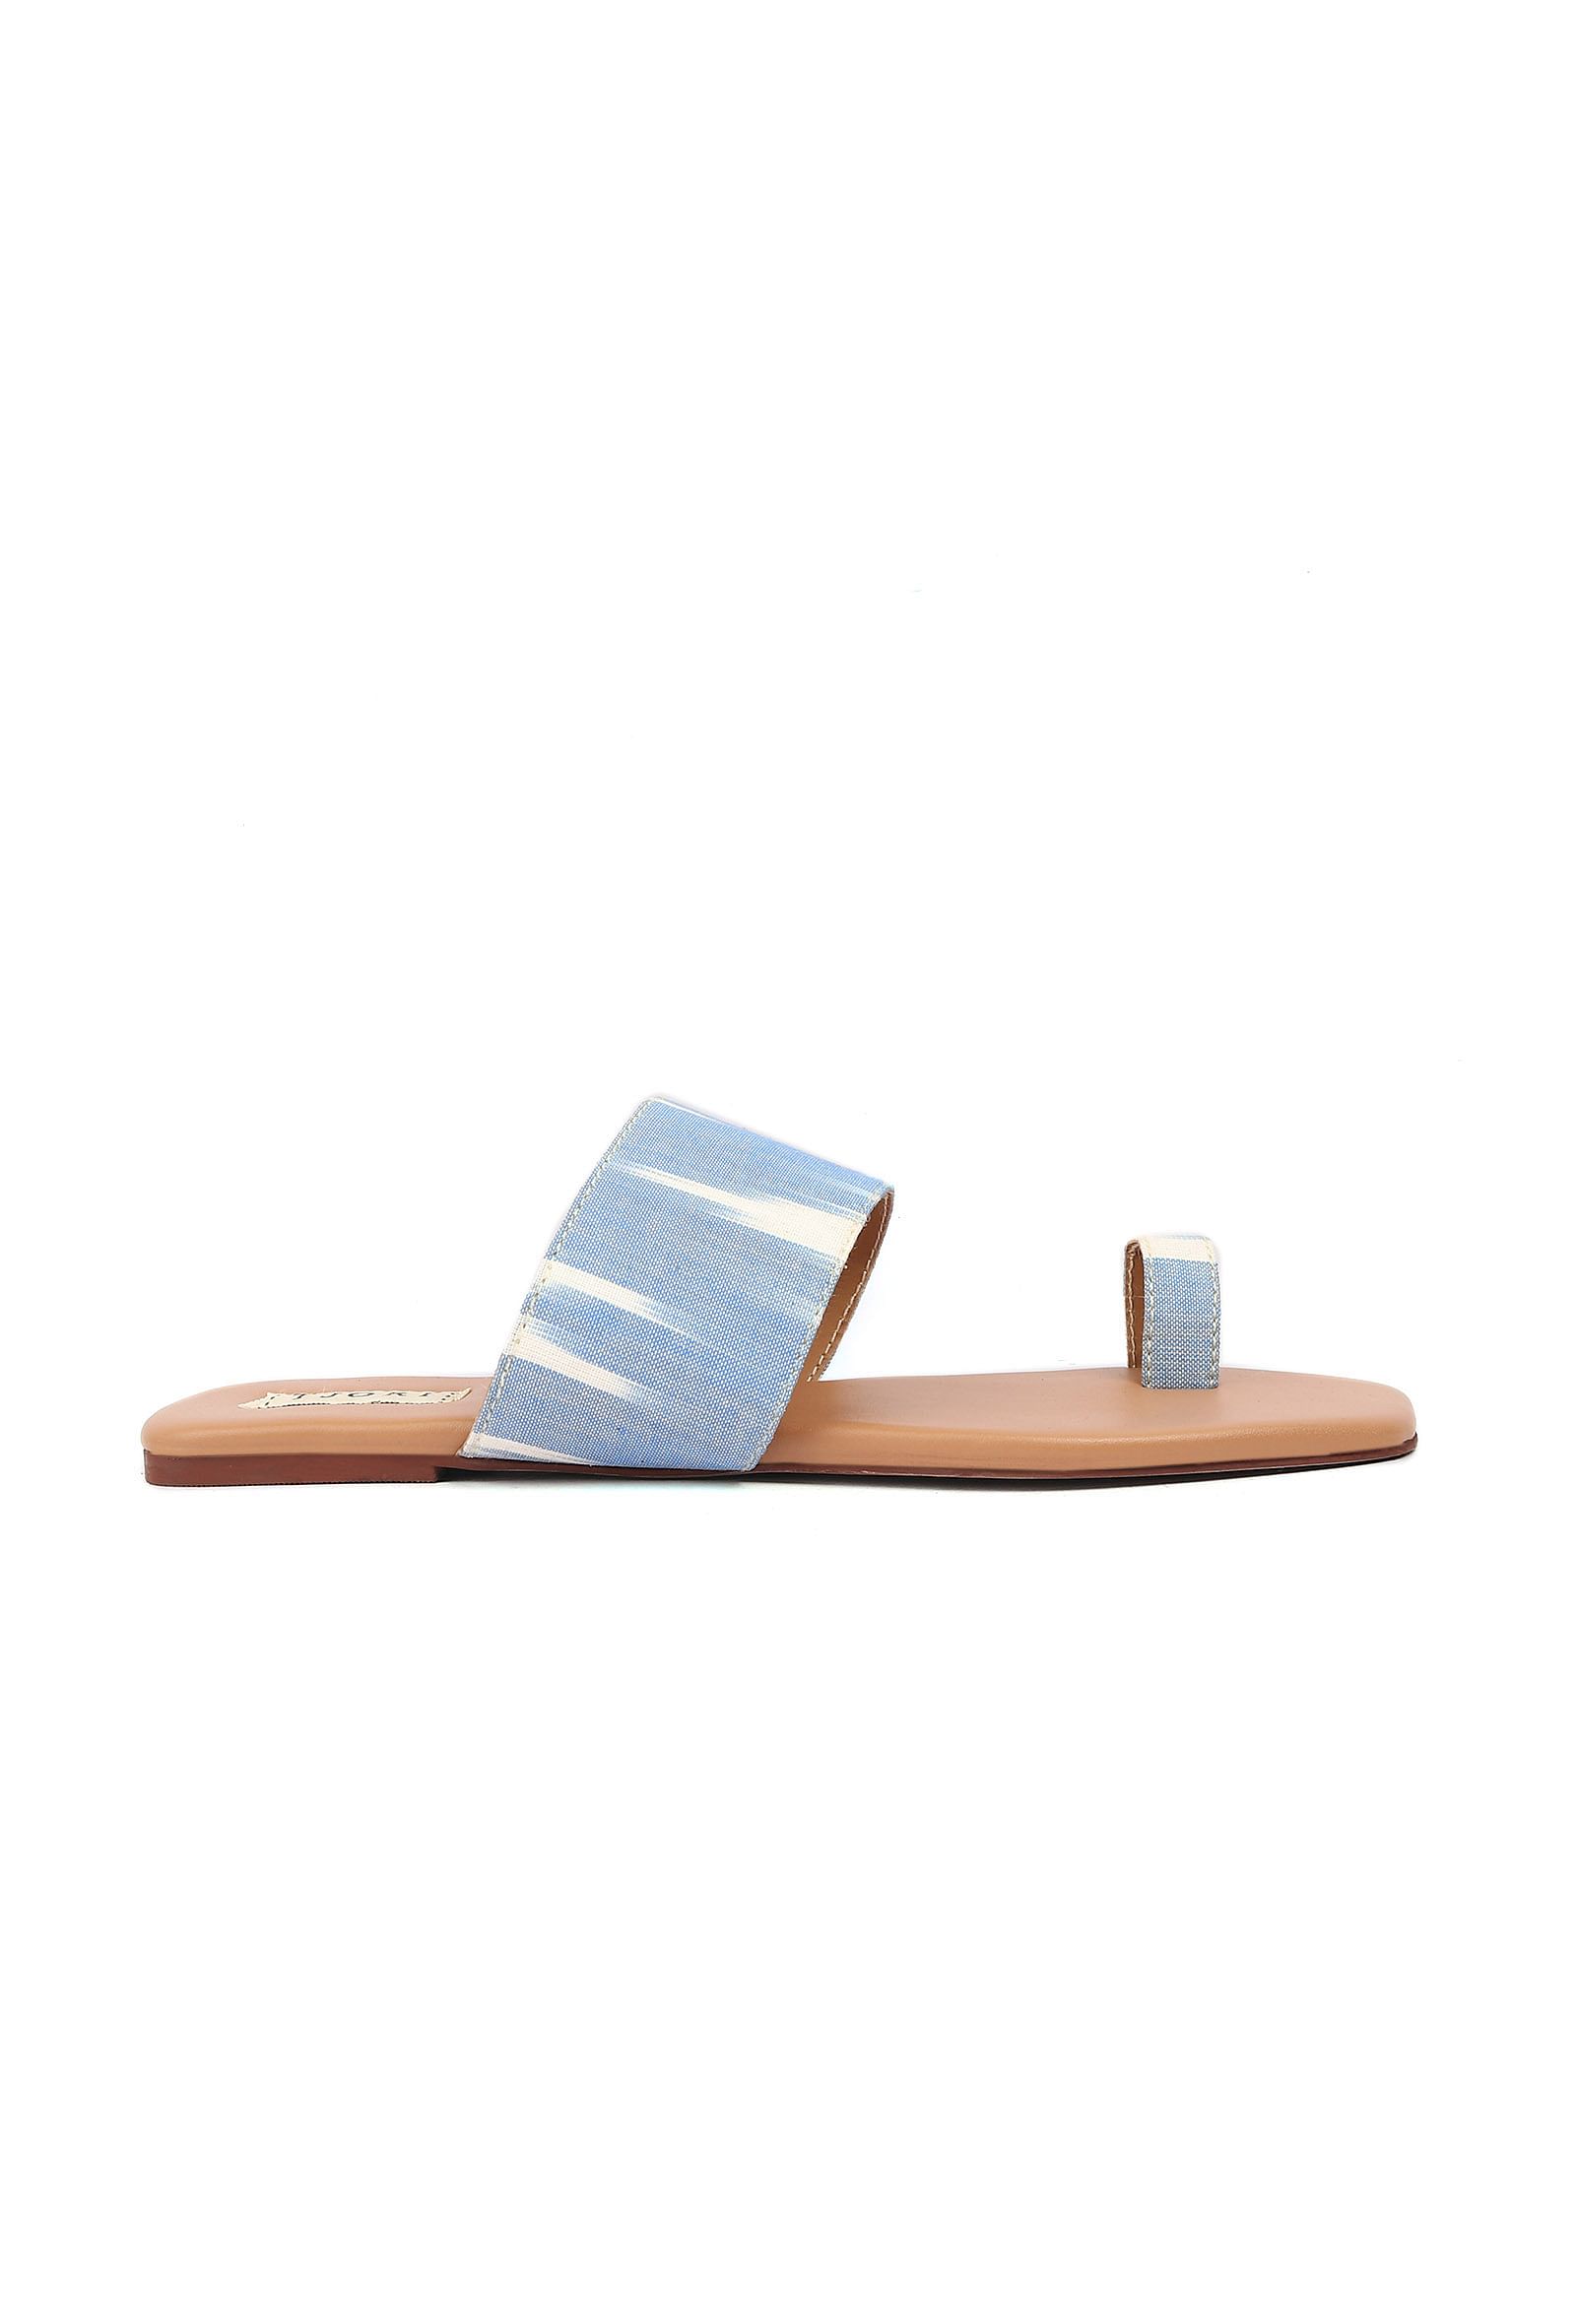 Arctic Blue & Tortilla Brown Ikat One Toe Cruelty Free Leather Flats